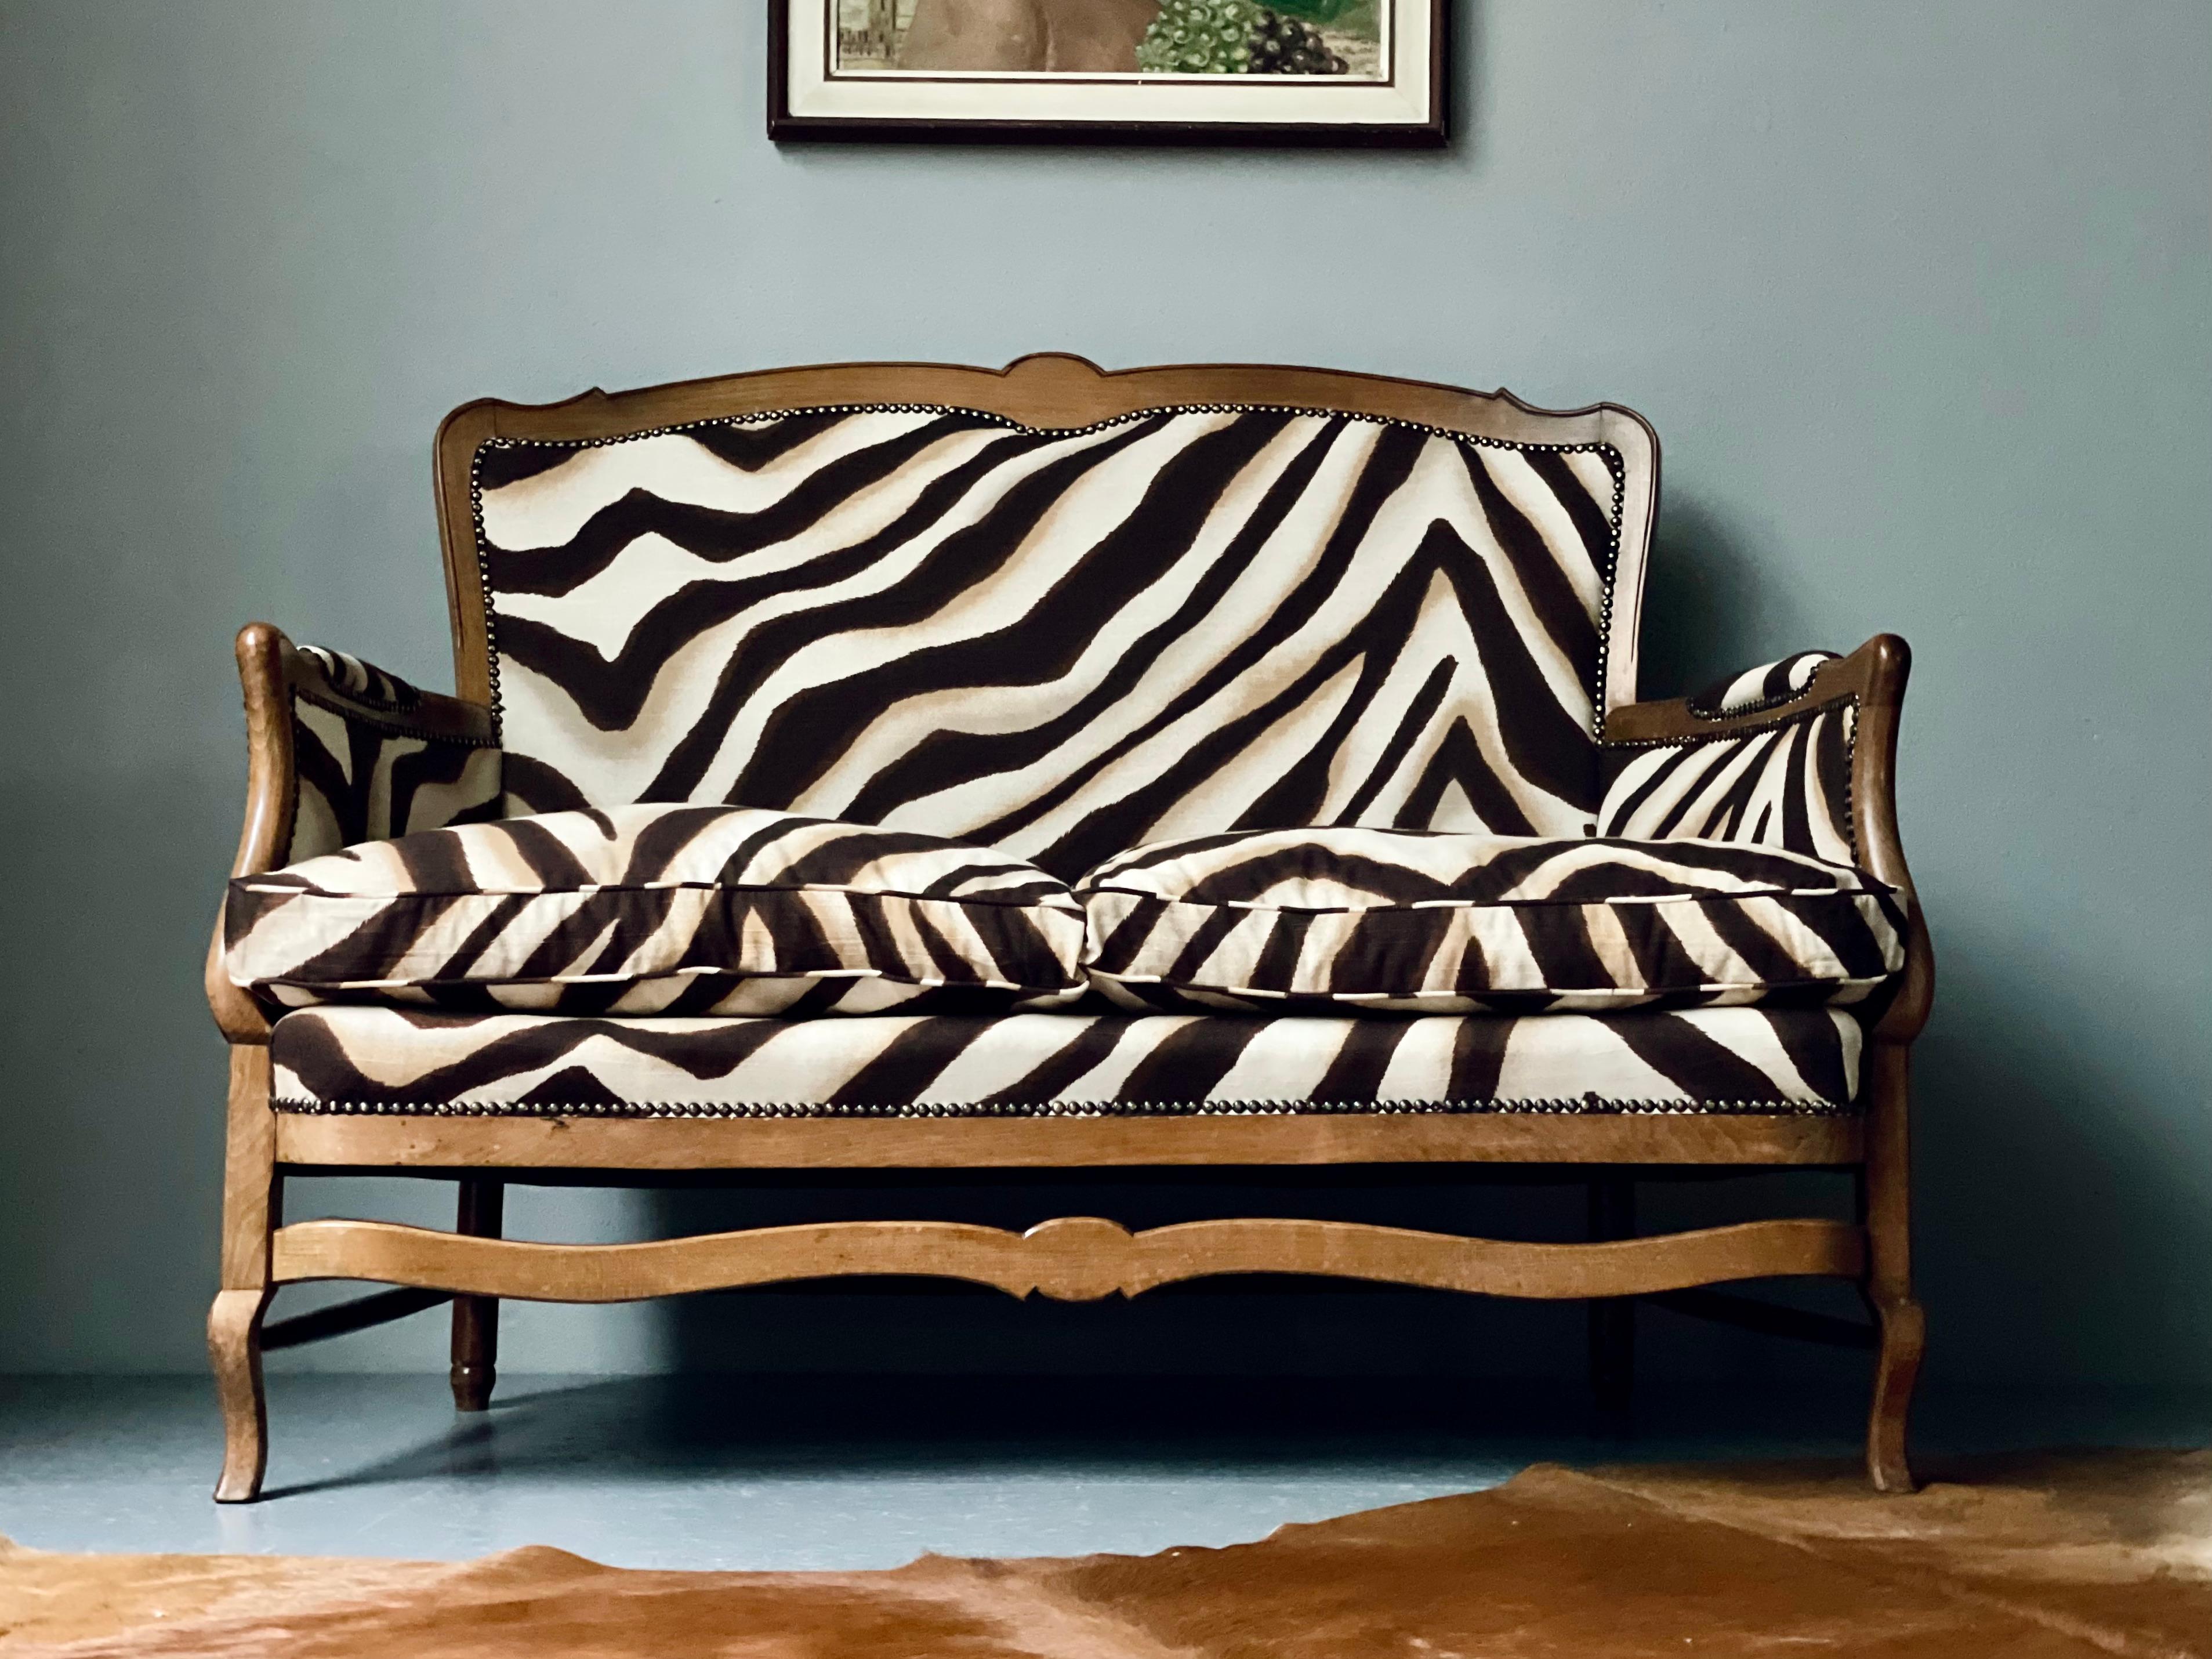 Vintage loveseat re-designed with Ralph Lauren fabric for a special wow! The 1960's piece has been traditionally upholstered using down filling for the cushions.